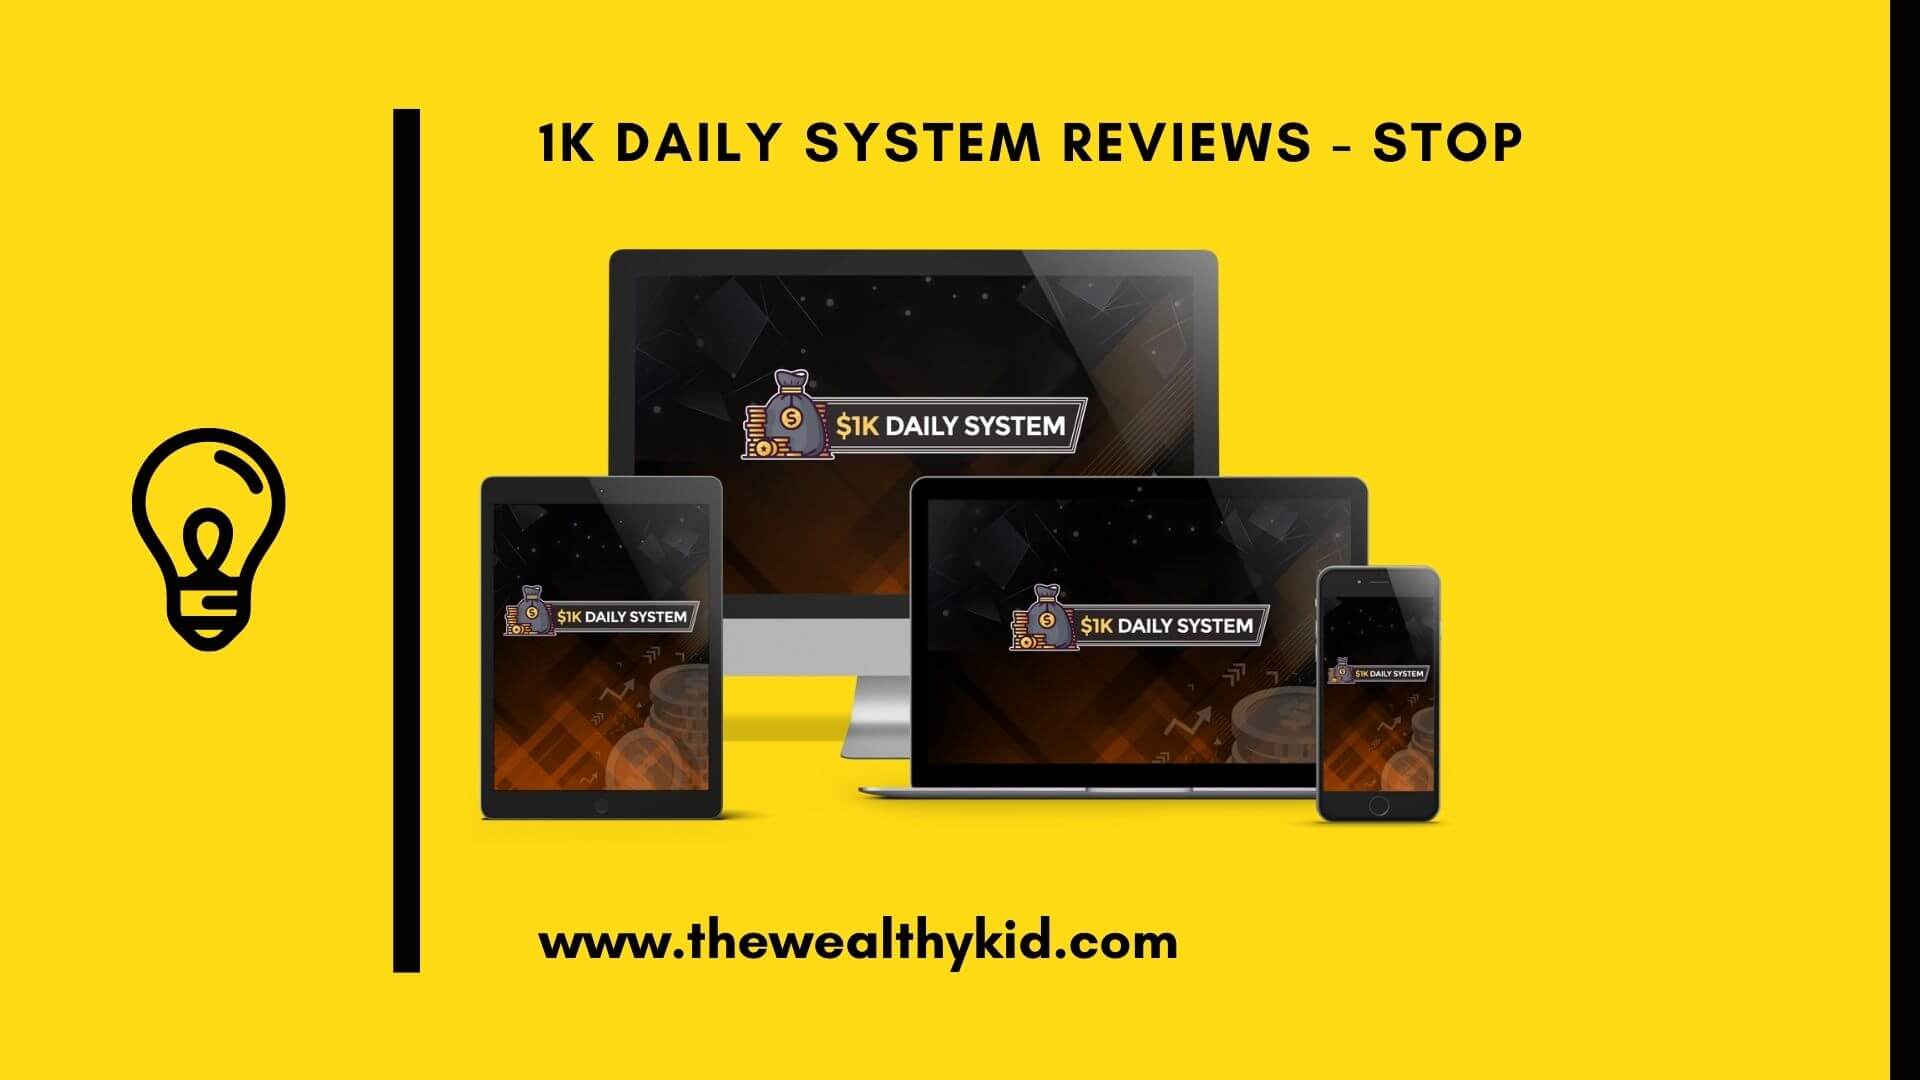 1k Daily System Review - Featured Image